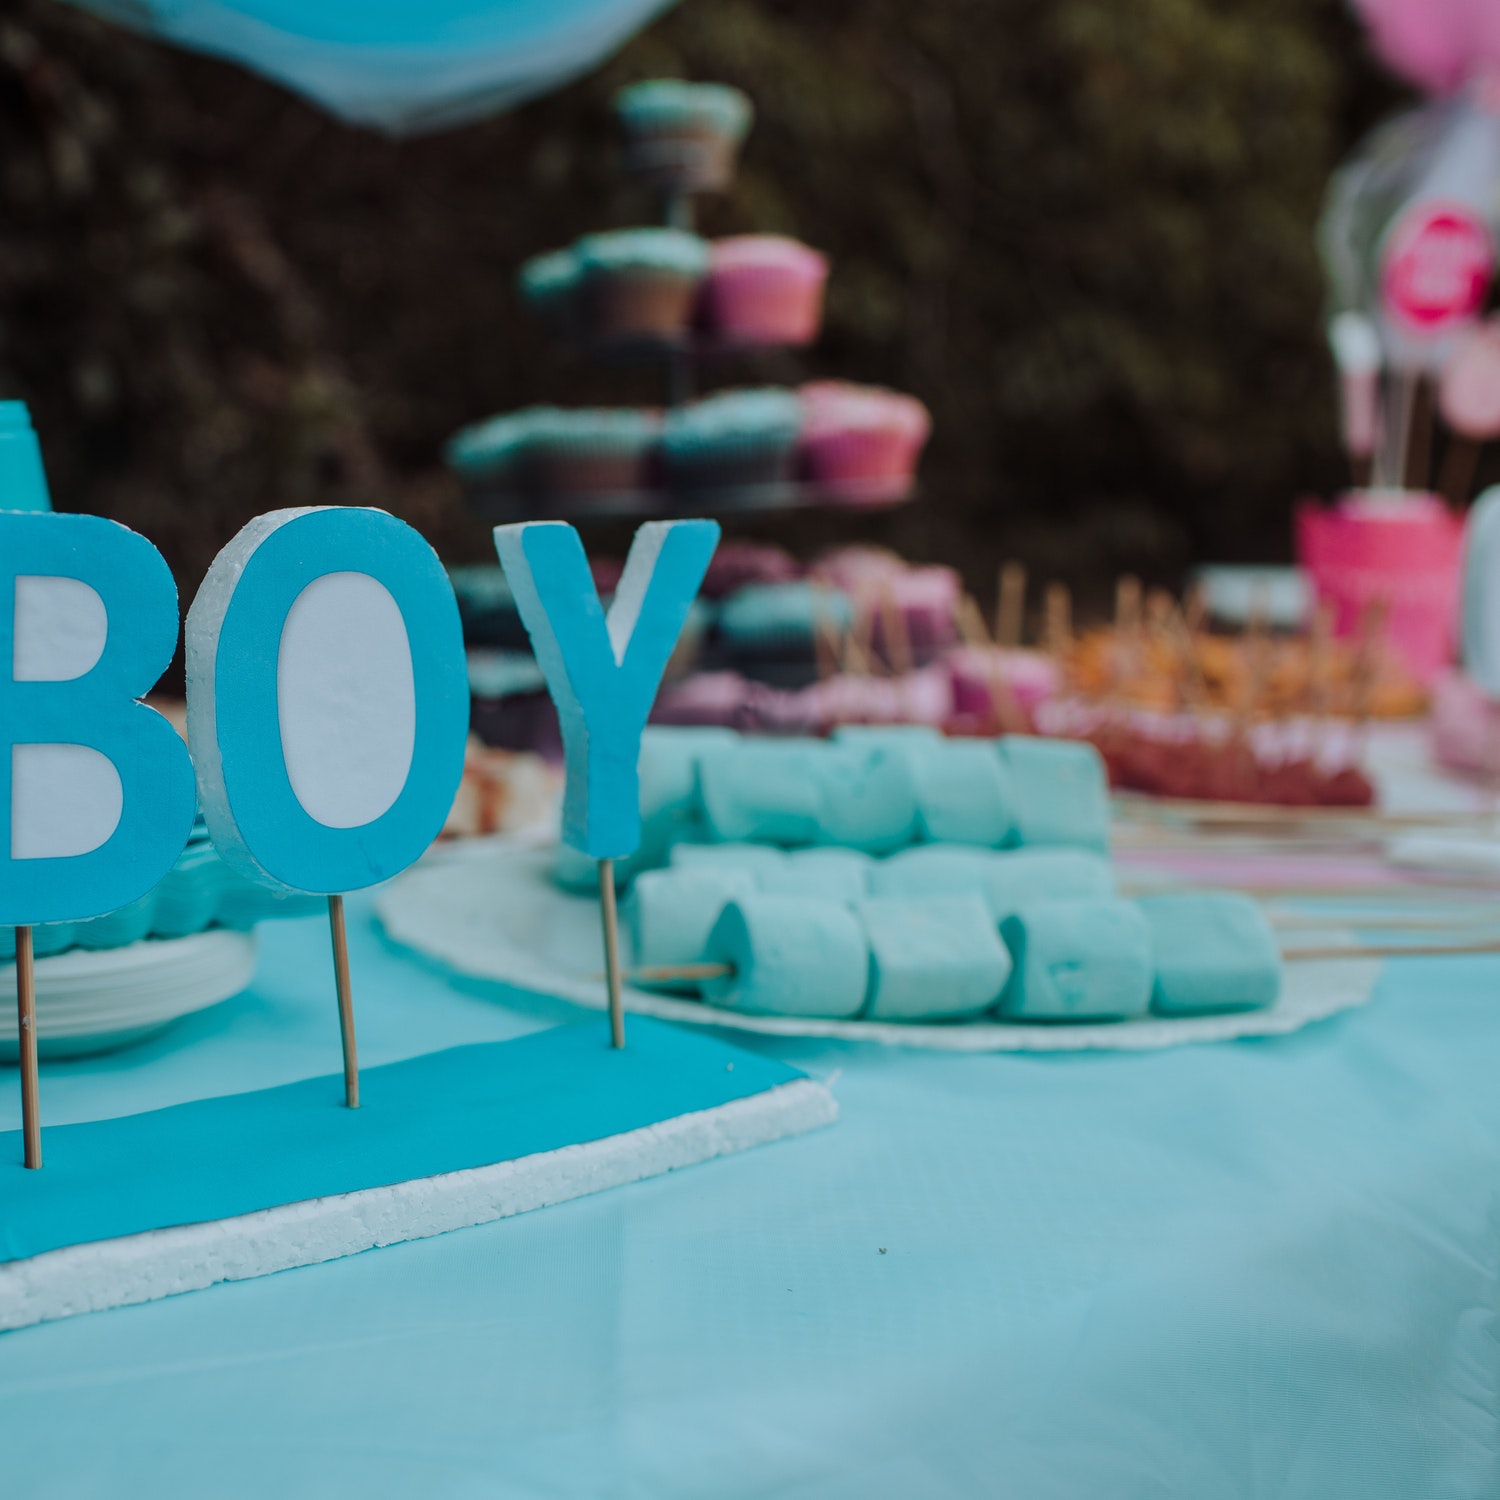 Gender Reveal Party Gone Wrong: Cannon Powder Fires Into Dad To Be's Crotch